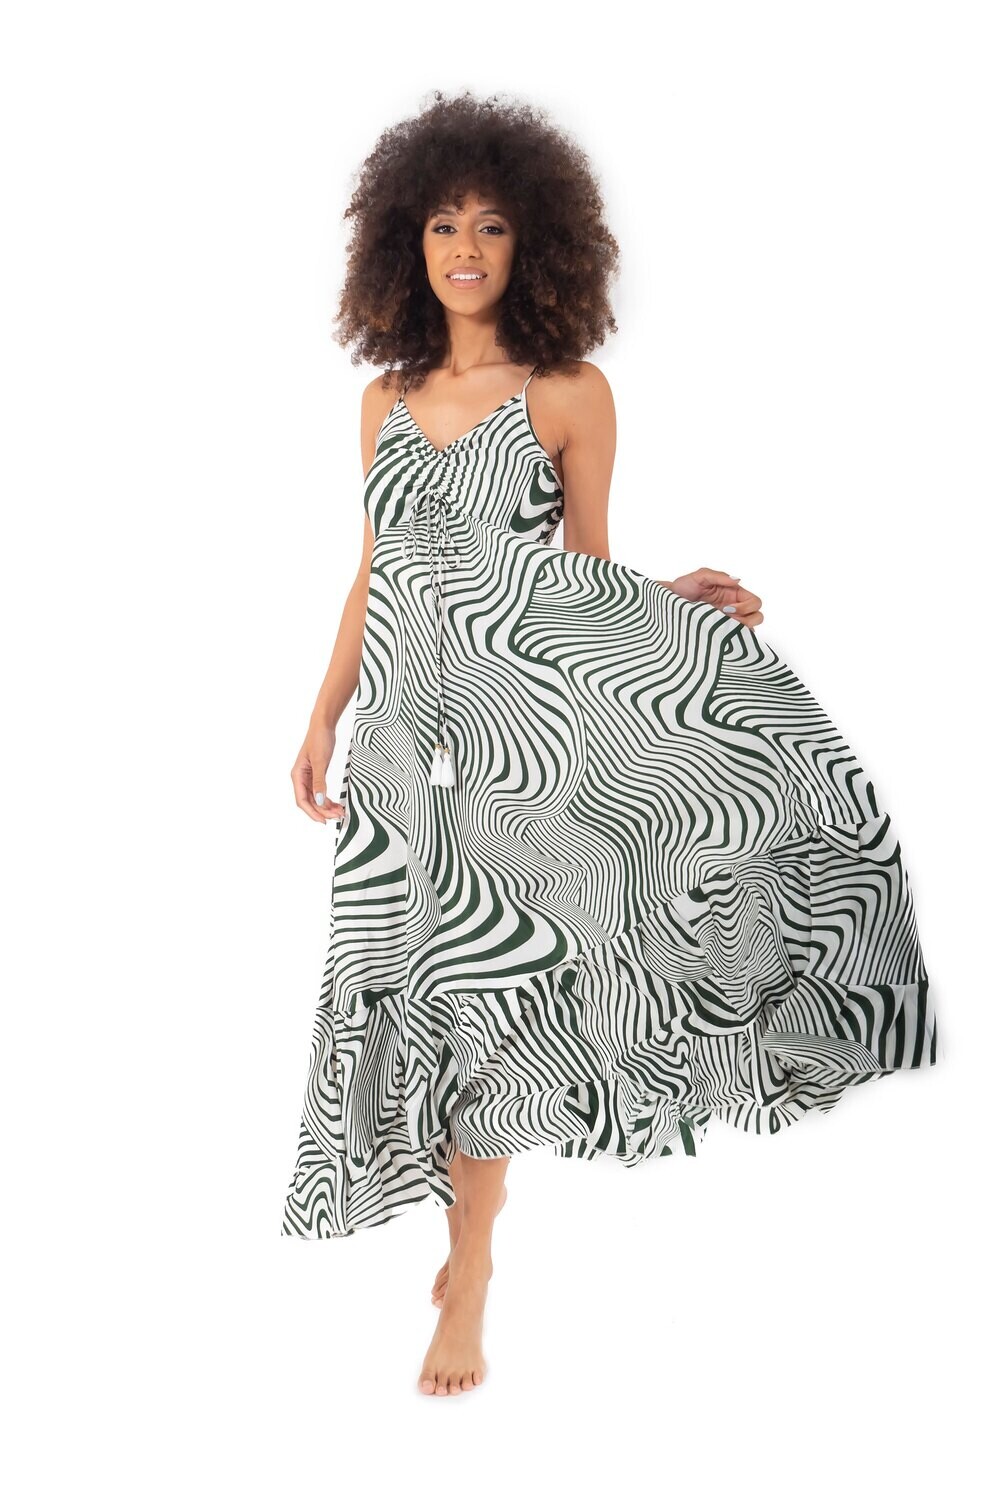 ICONIQUE ANGIE GREEN
maxi jurk